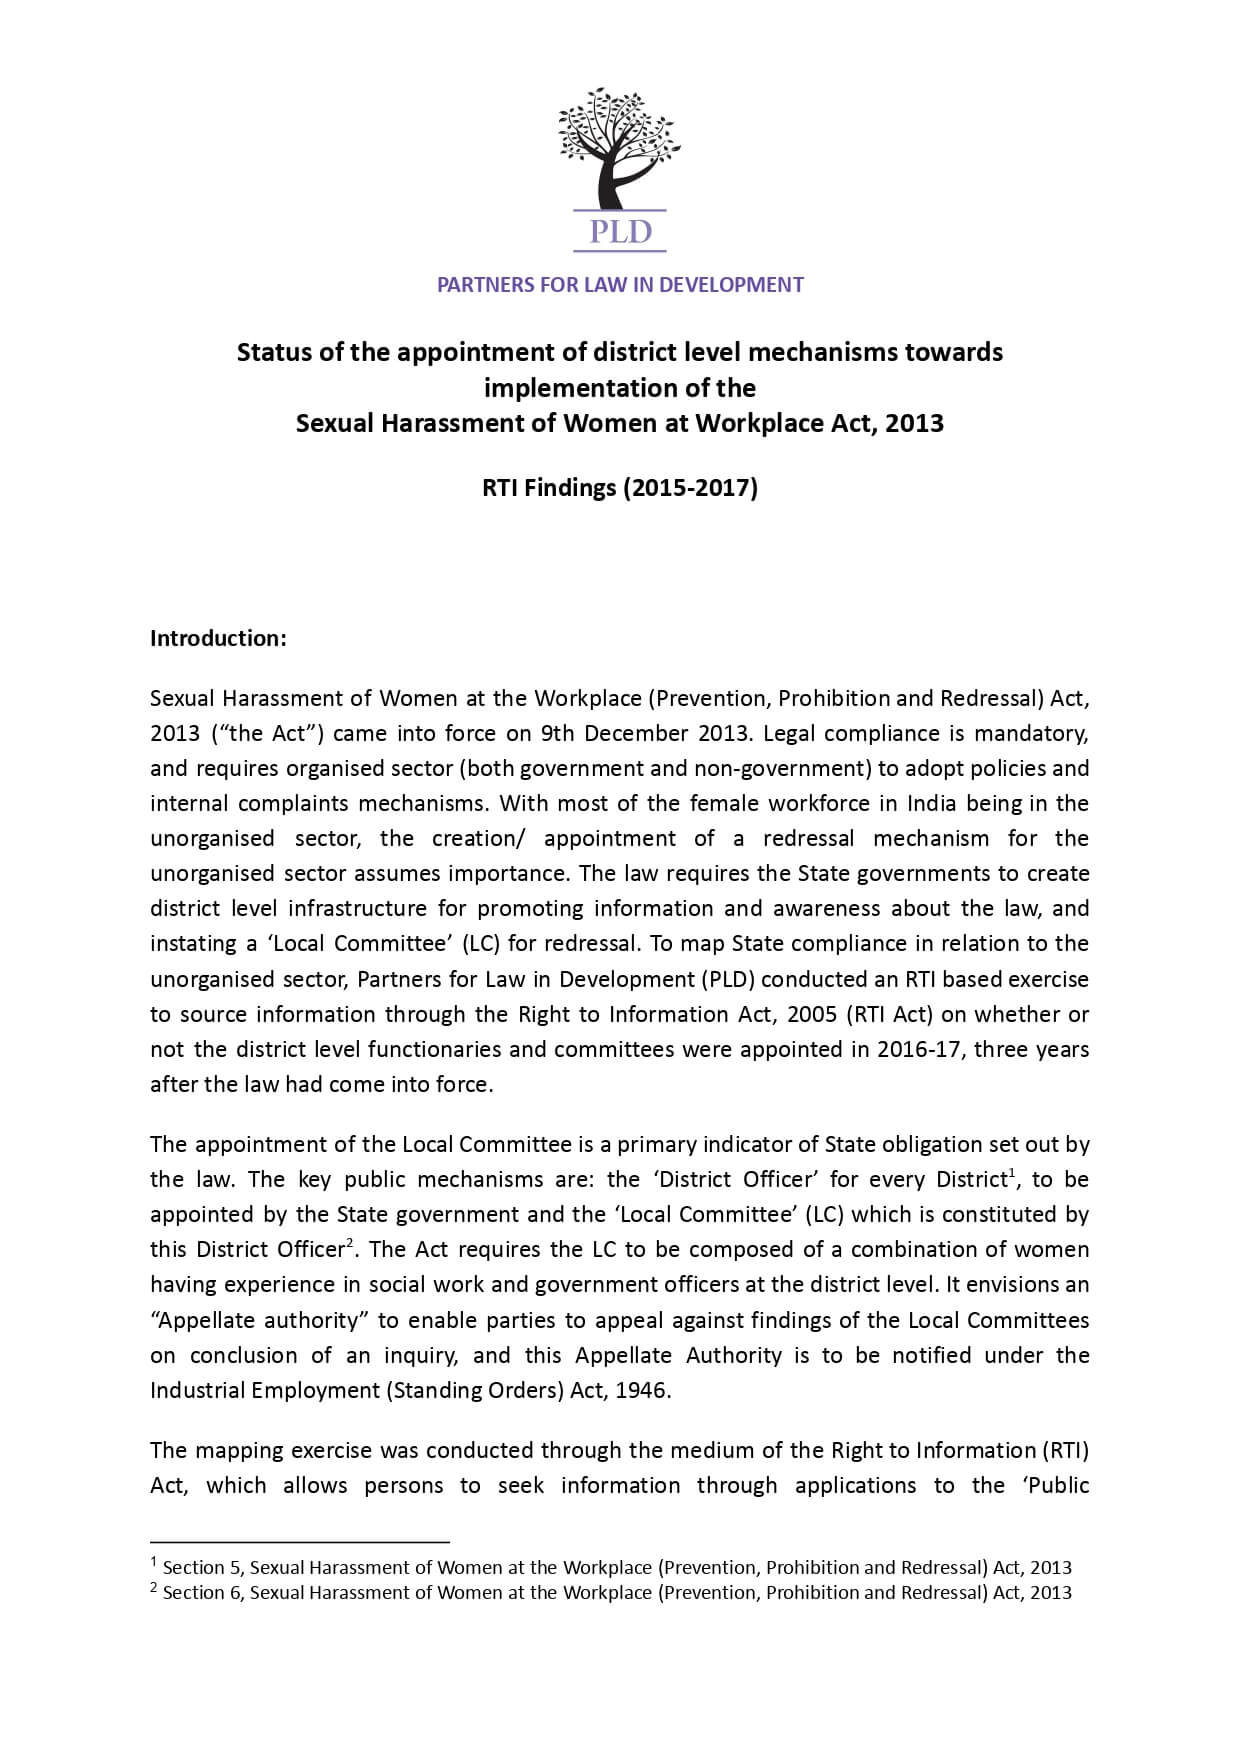 Status of the appointment of district level mechanisms towards implementation of the Sexual Harassment of Women at Workplace Act, 2013 RTI Findings (2015-2017)